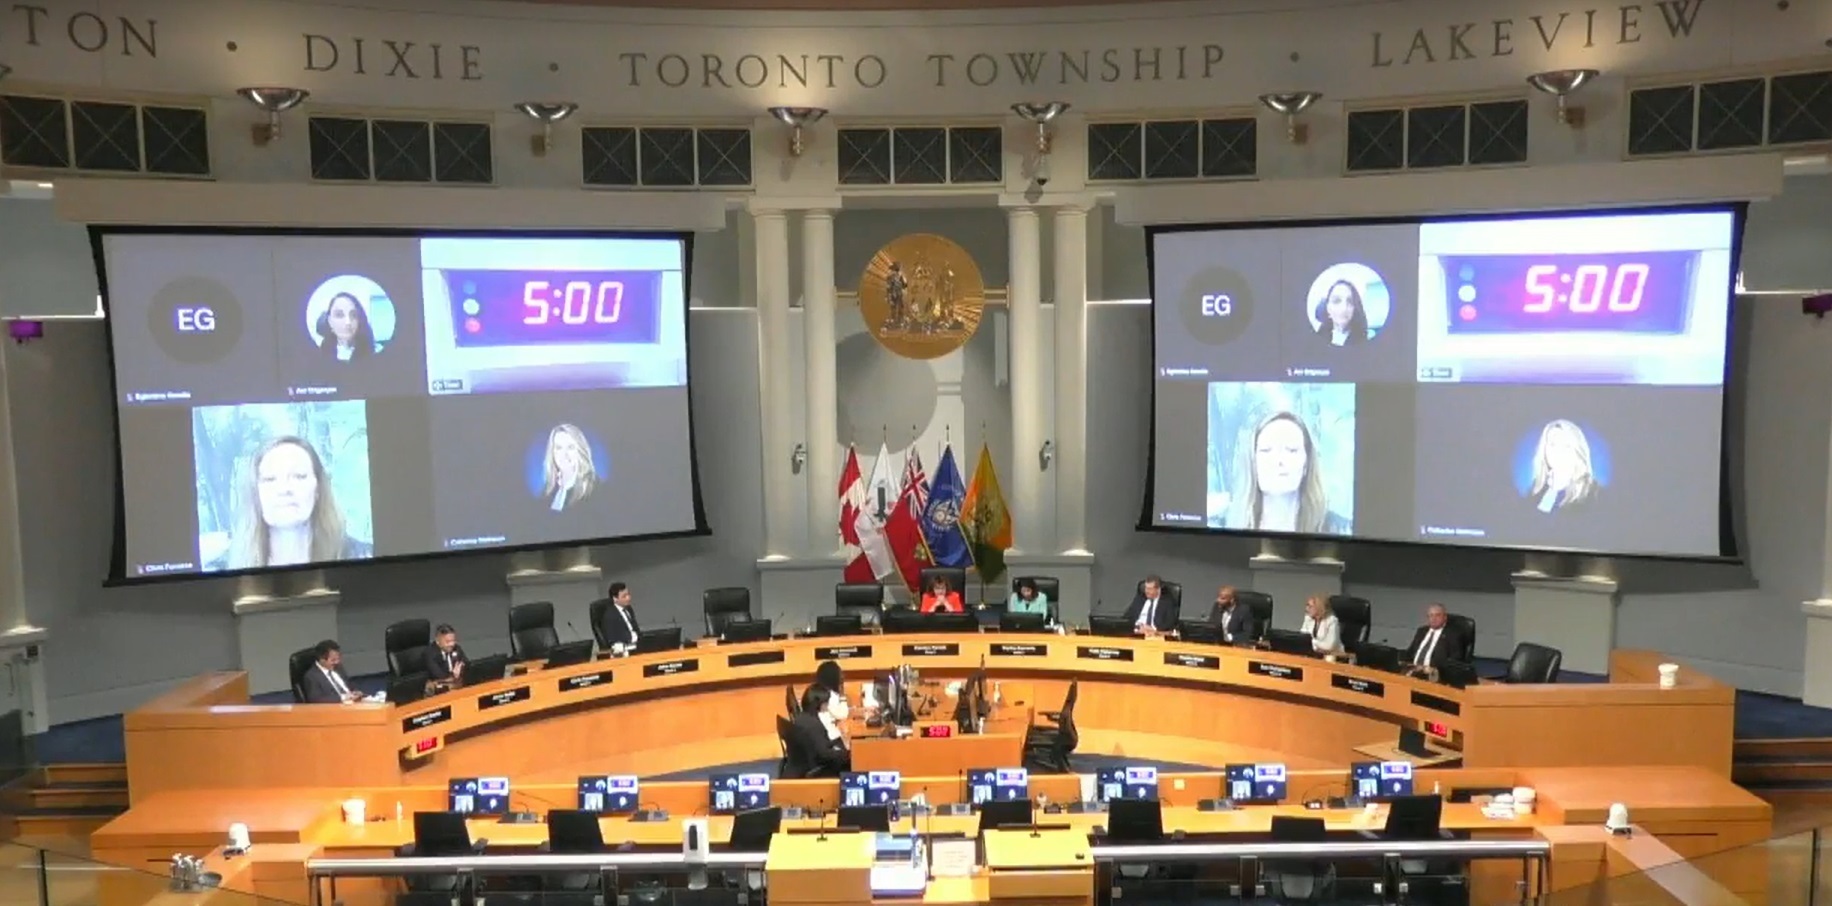 Nominations for Mississauga mayoral byelection accepted starting March 6.